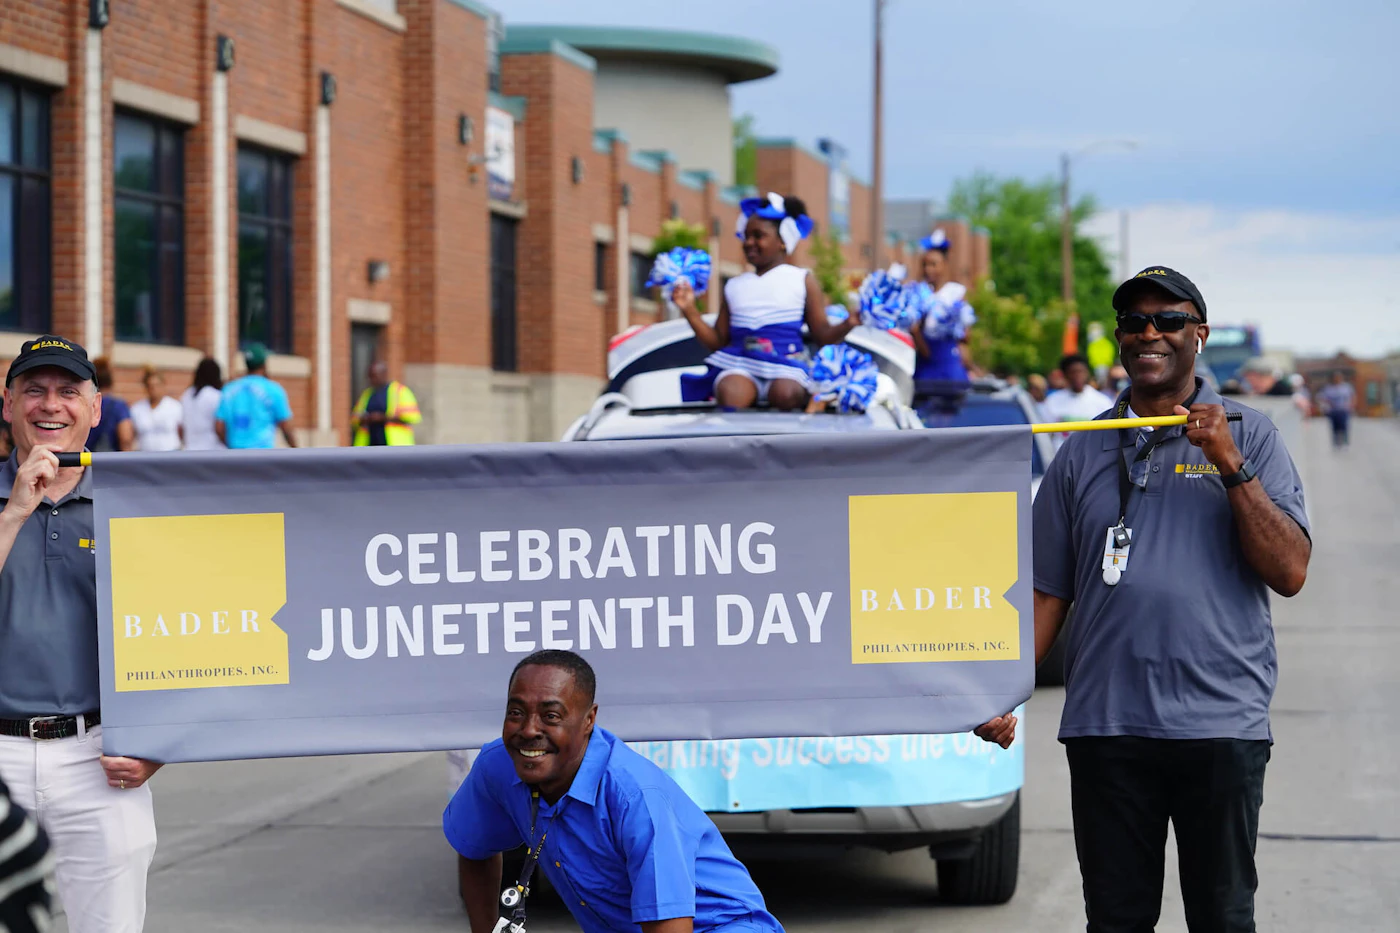 Milwaukee, Wisconsin USA - June 19th, 2021: African American community members of Milwaukee held a parade to celebrate Juneteenth holiday.